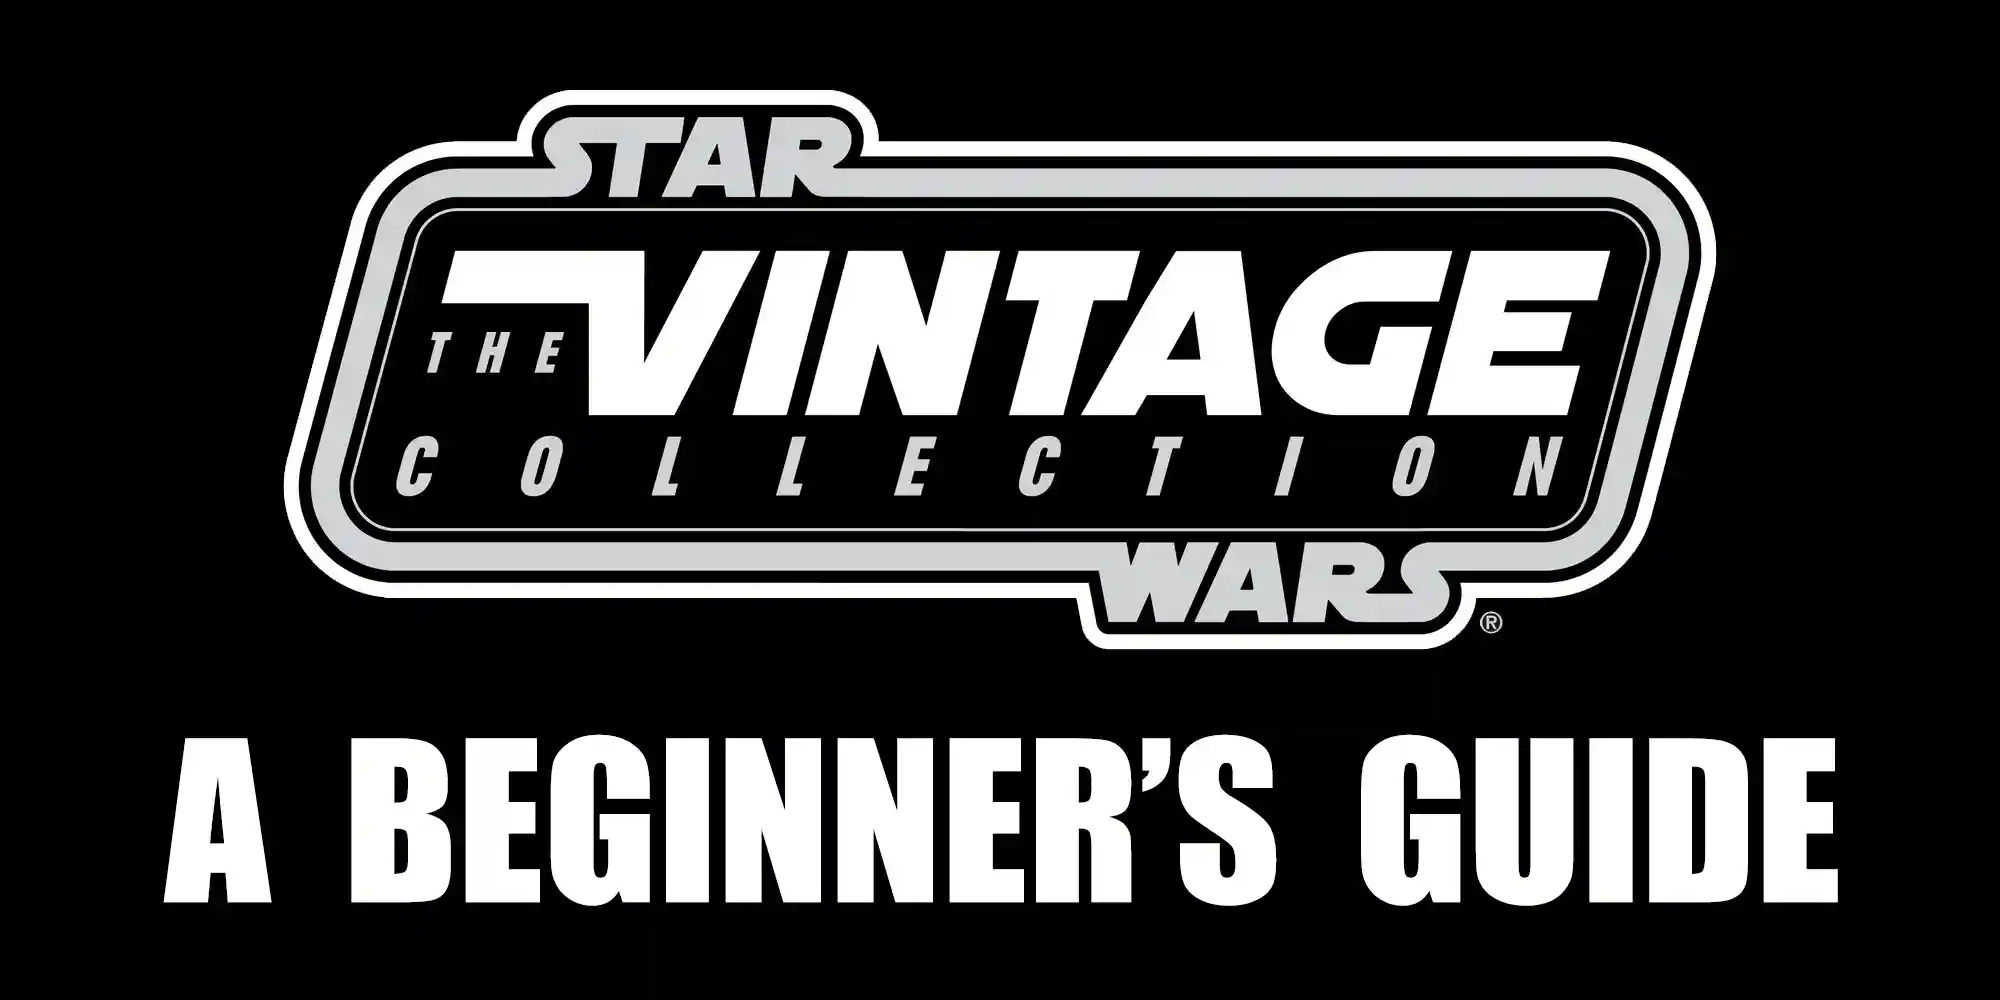 A Beginner's Guide To The Vintage Collection